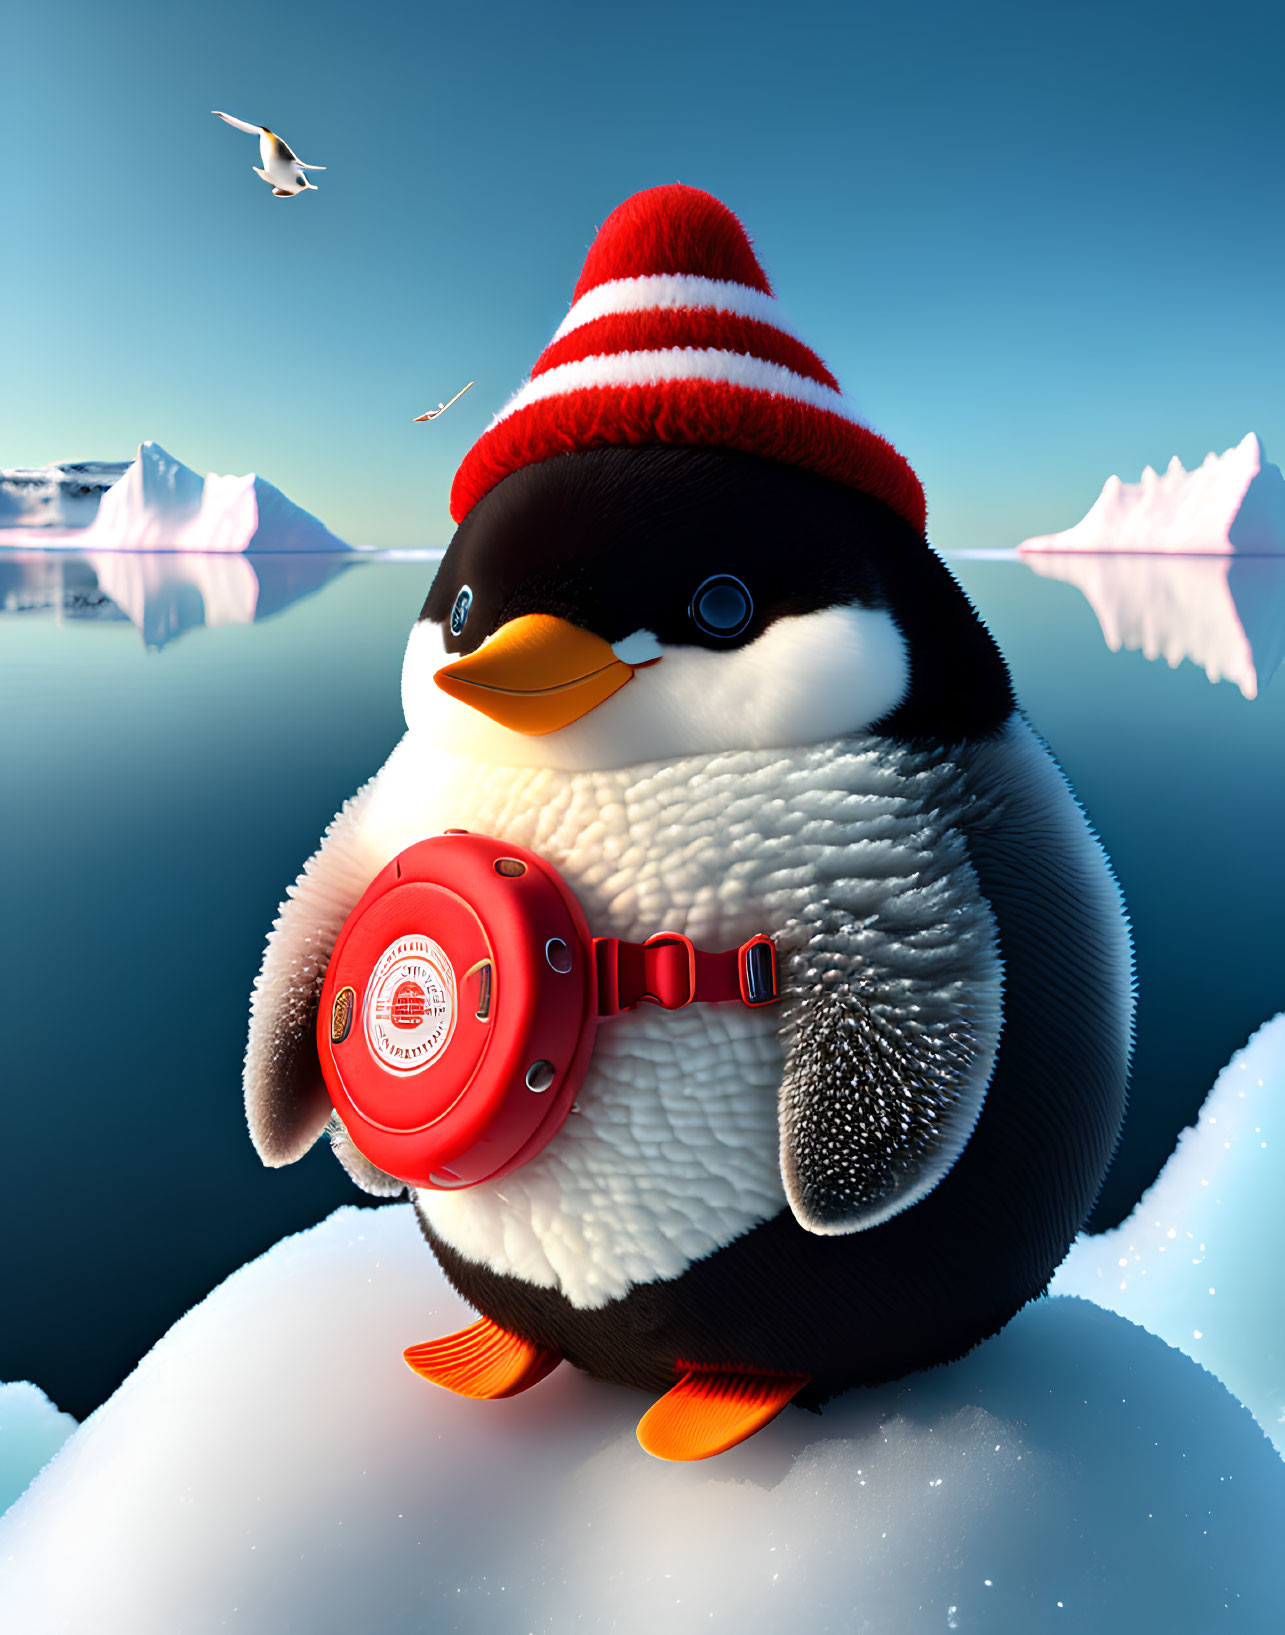 Cartoon penguin with striped hat and lifesaver in icy landscape